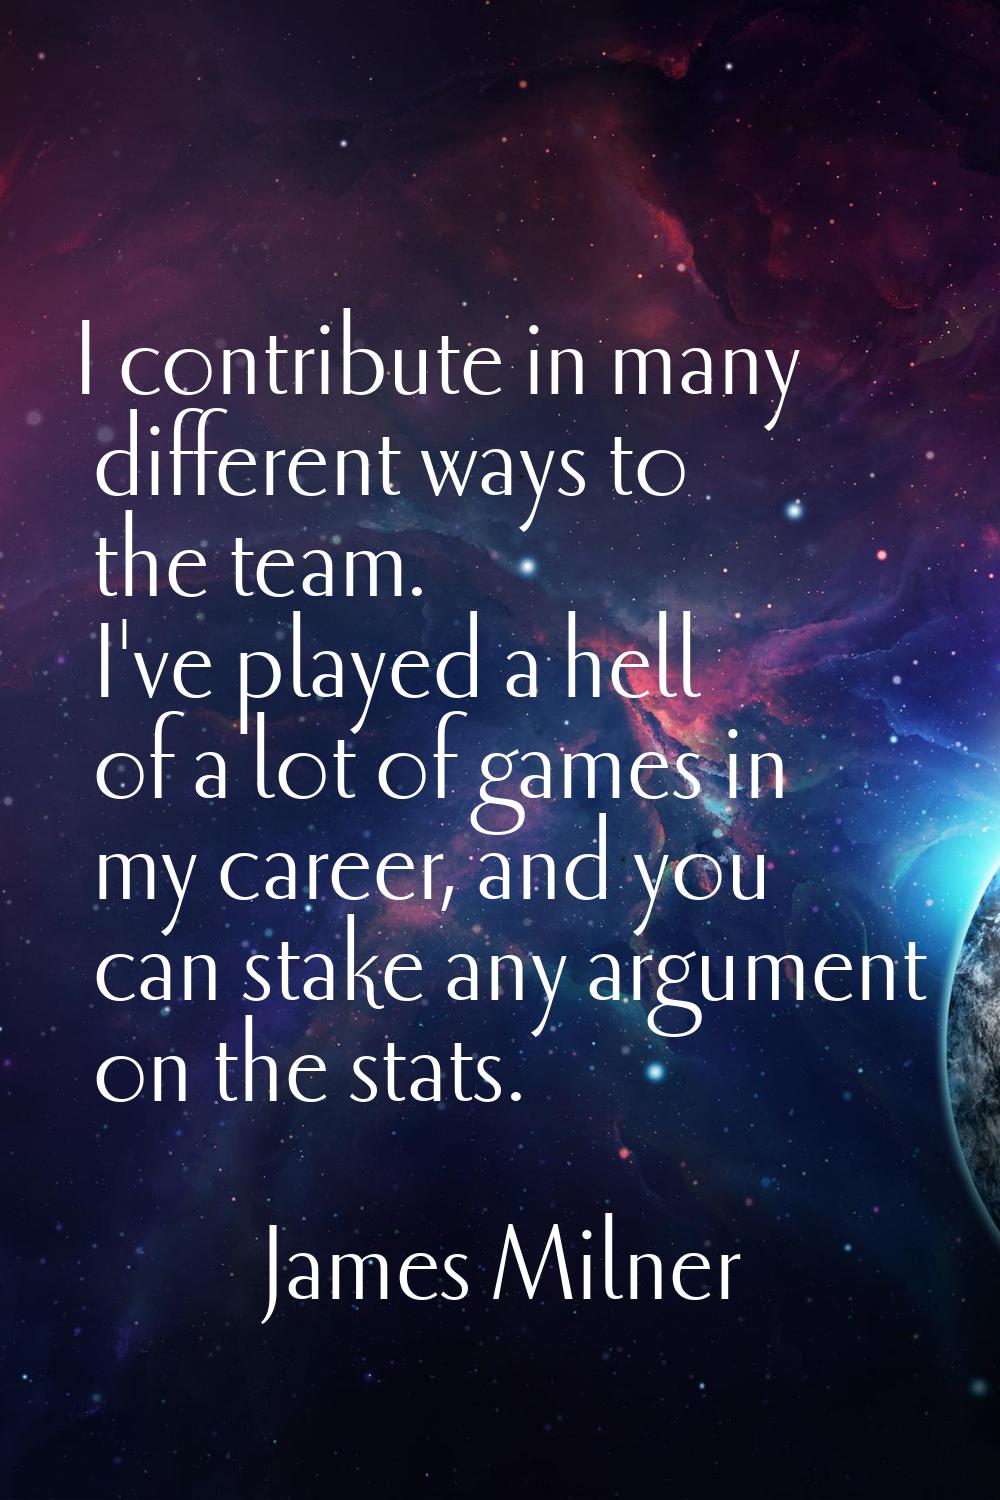 I contribute in many different ways to the team. I've played a hell of a lot of games in my career,